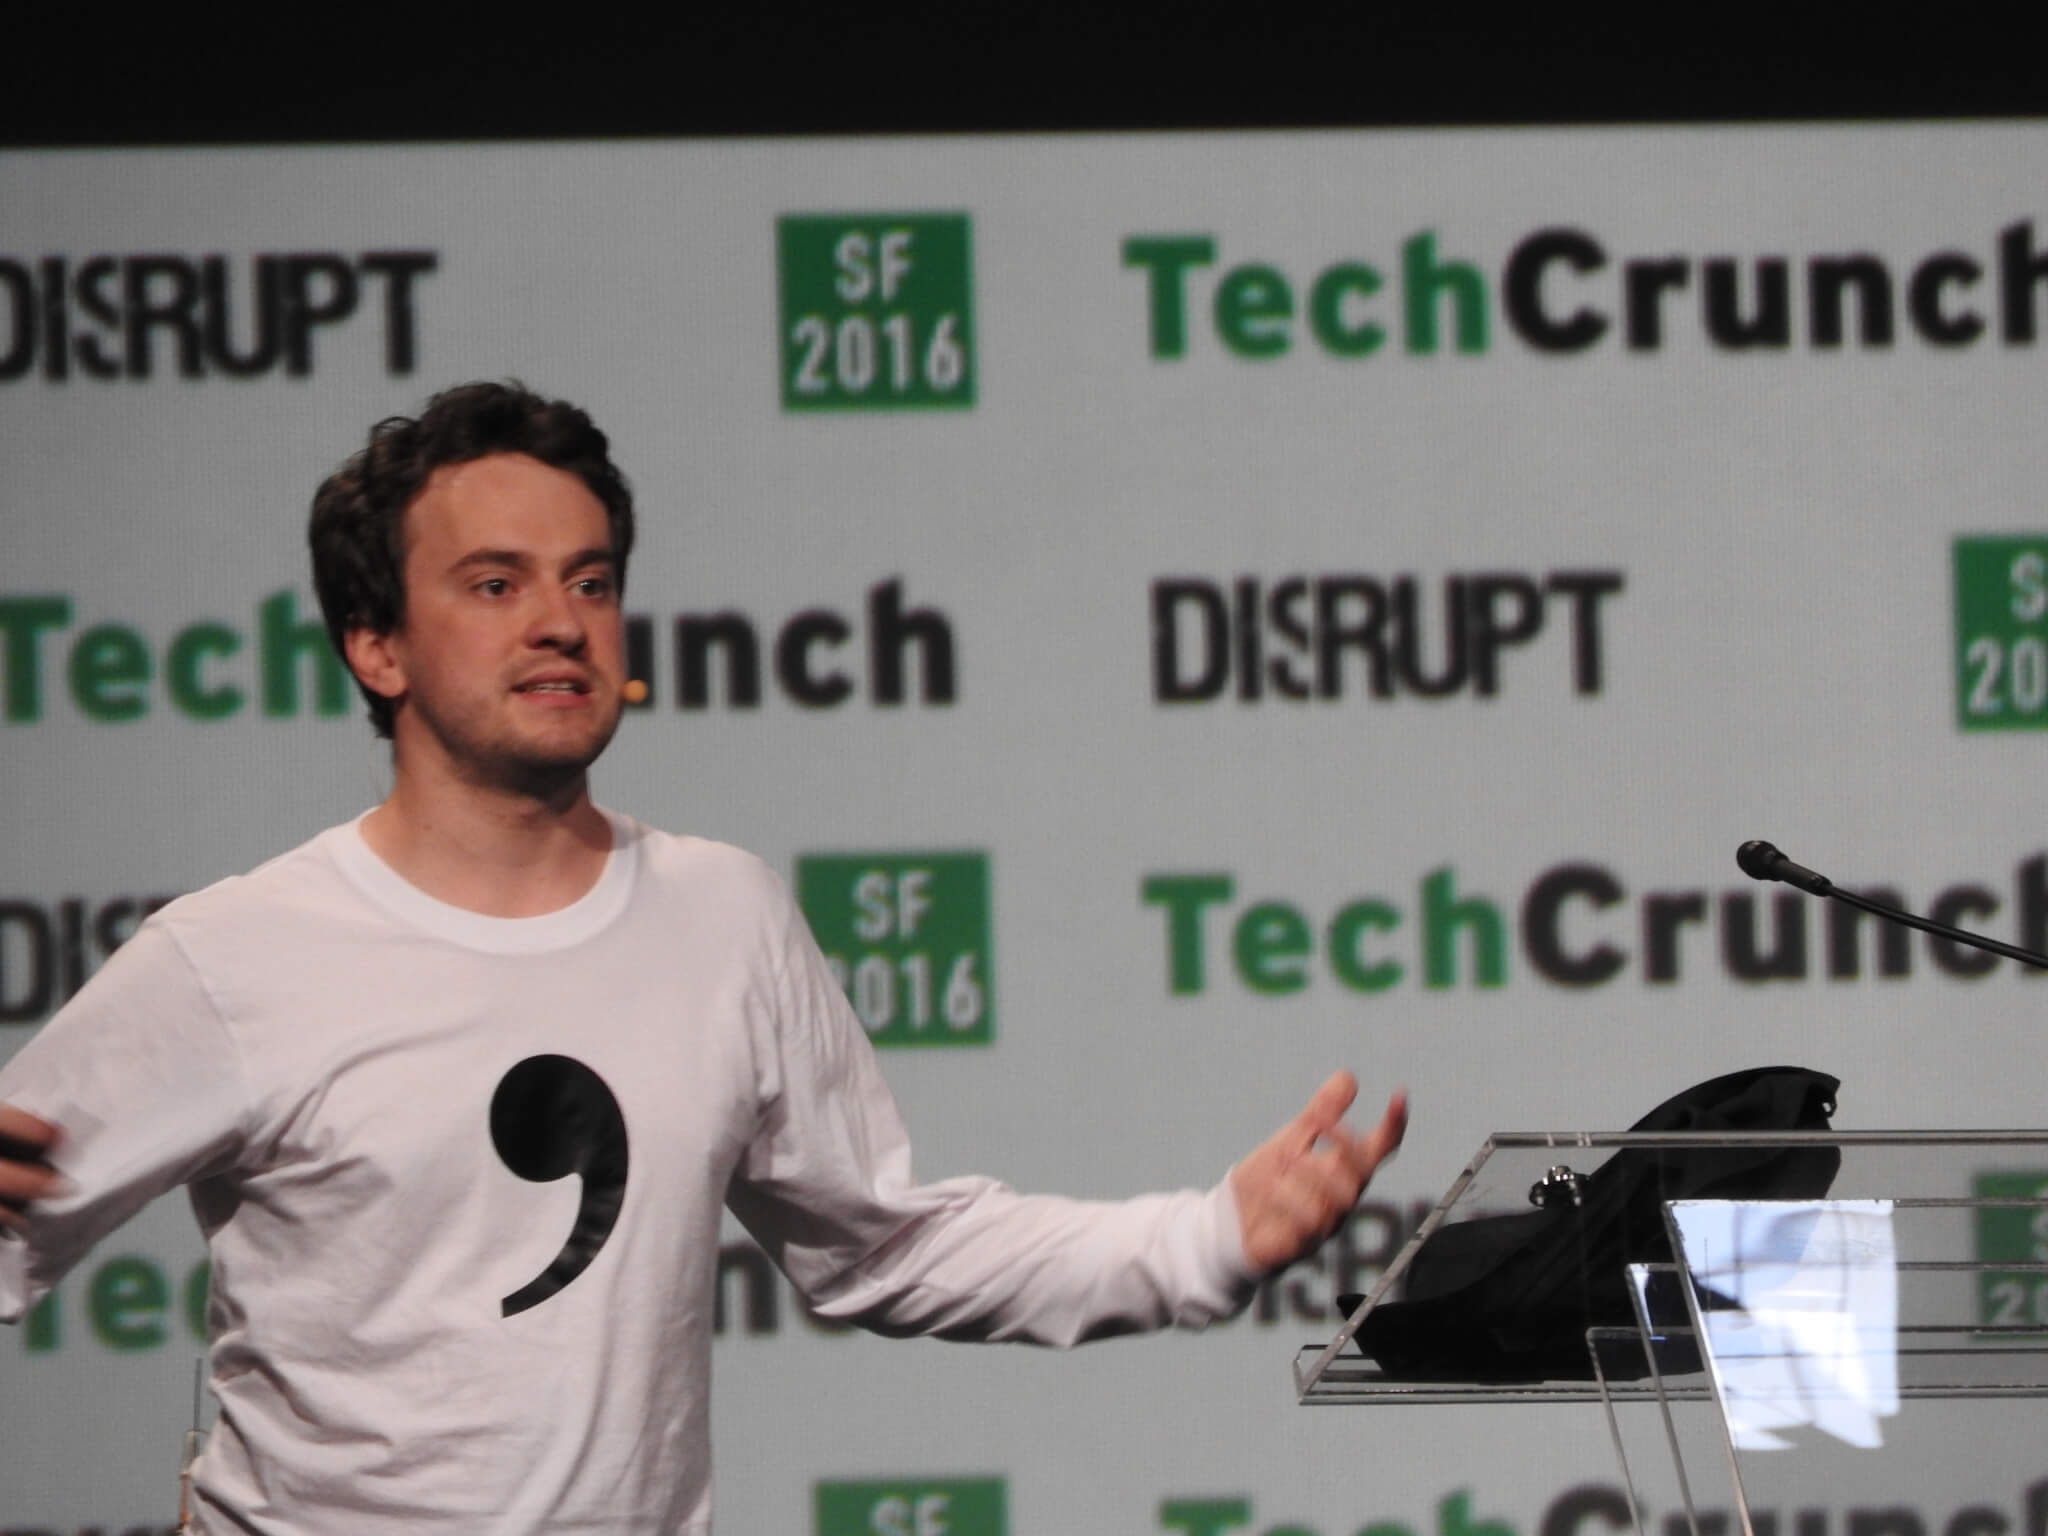 George "Geohot" Hotz is head of Comma.ai.